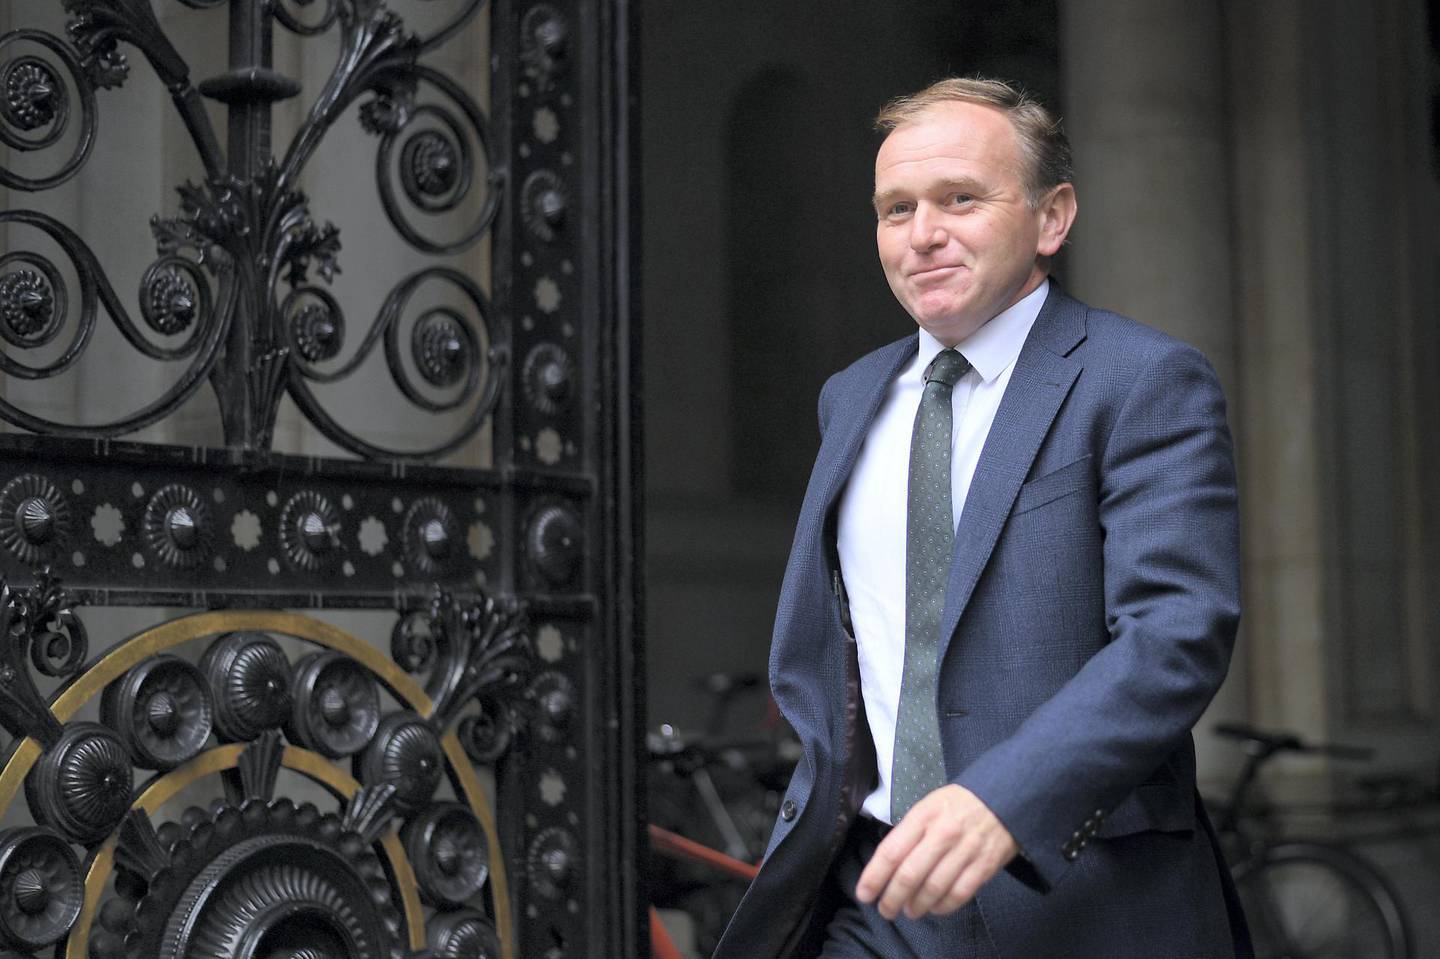 LONDON, ENGLAND - SEPTEMBER 08: Secretary of State for Environment, Food and Rural Affairs, George Eustice, leaves Downing Street on September 8, 2020 in London, England. (Photo by Leon Neal/Getty Images)